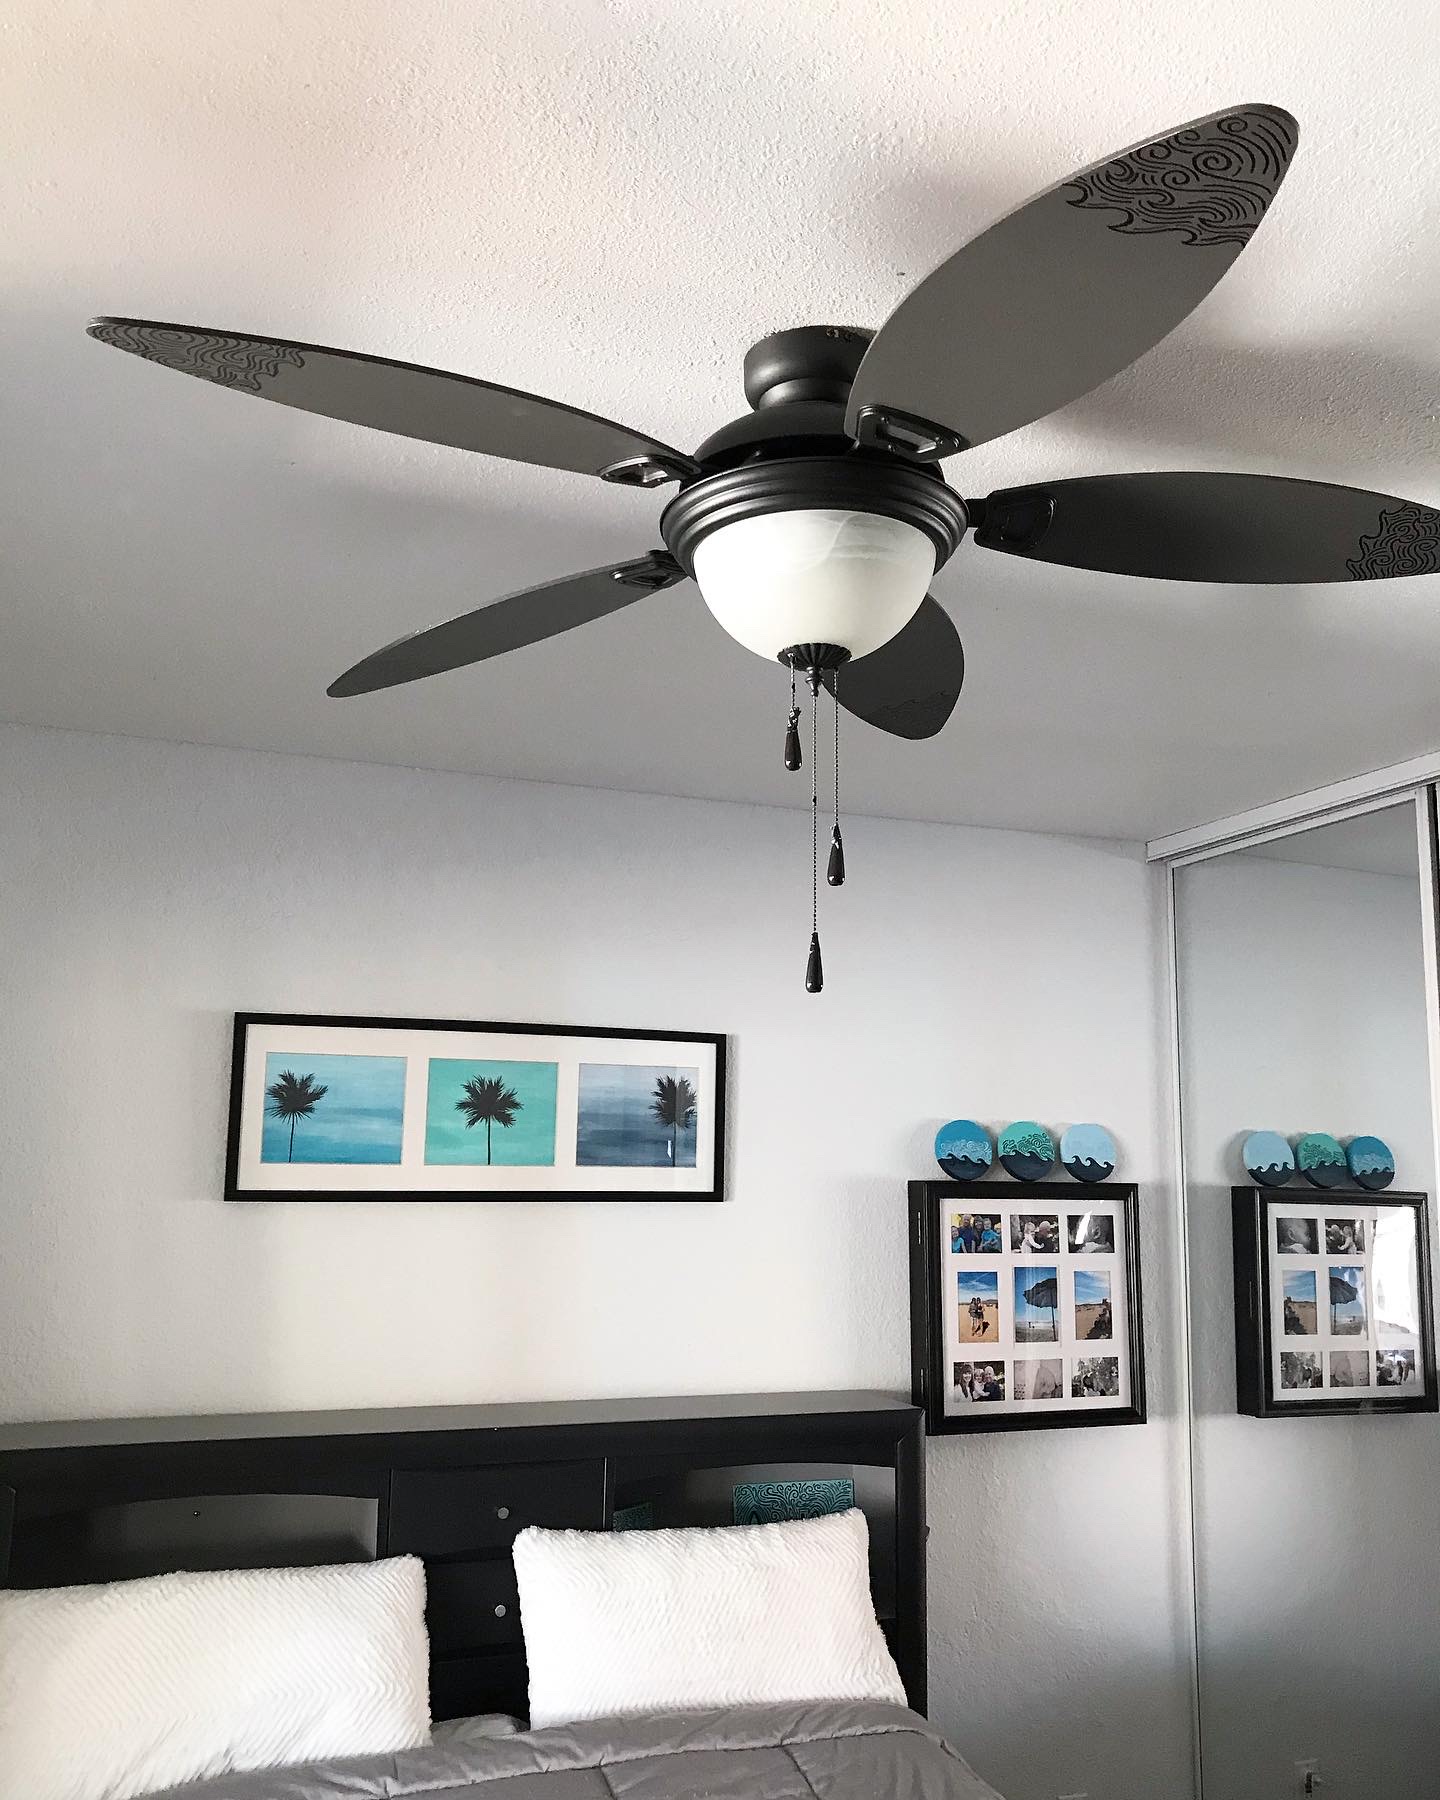 Paint a Ceiling Fan with Wave Designs